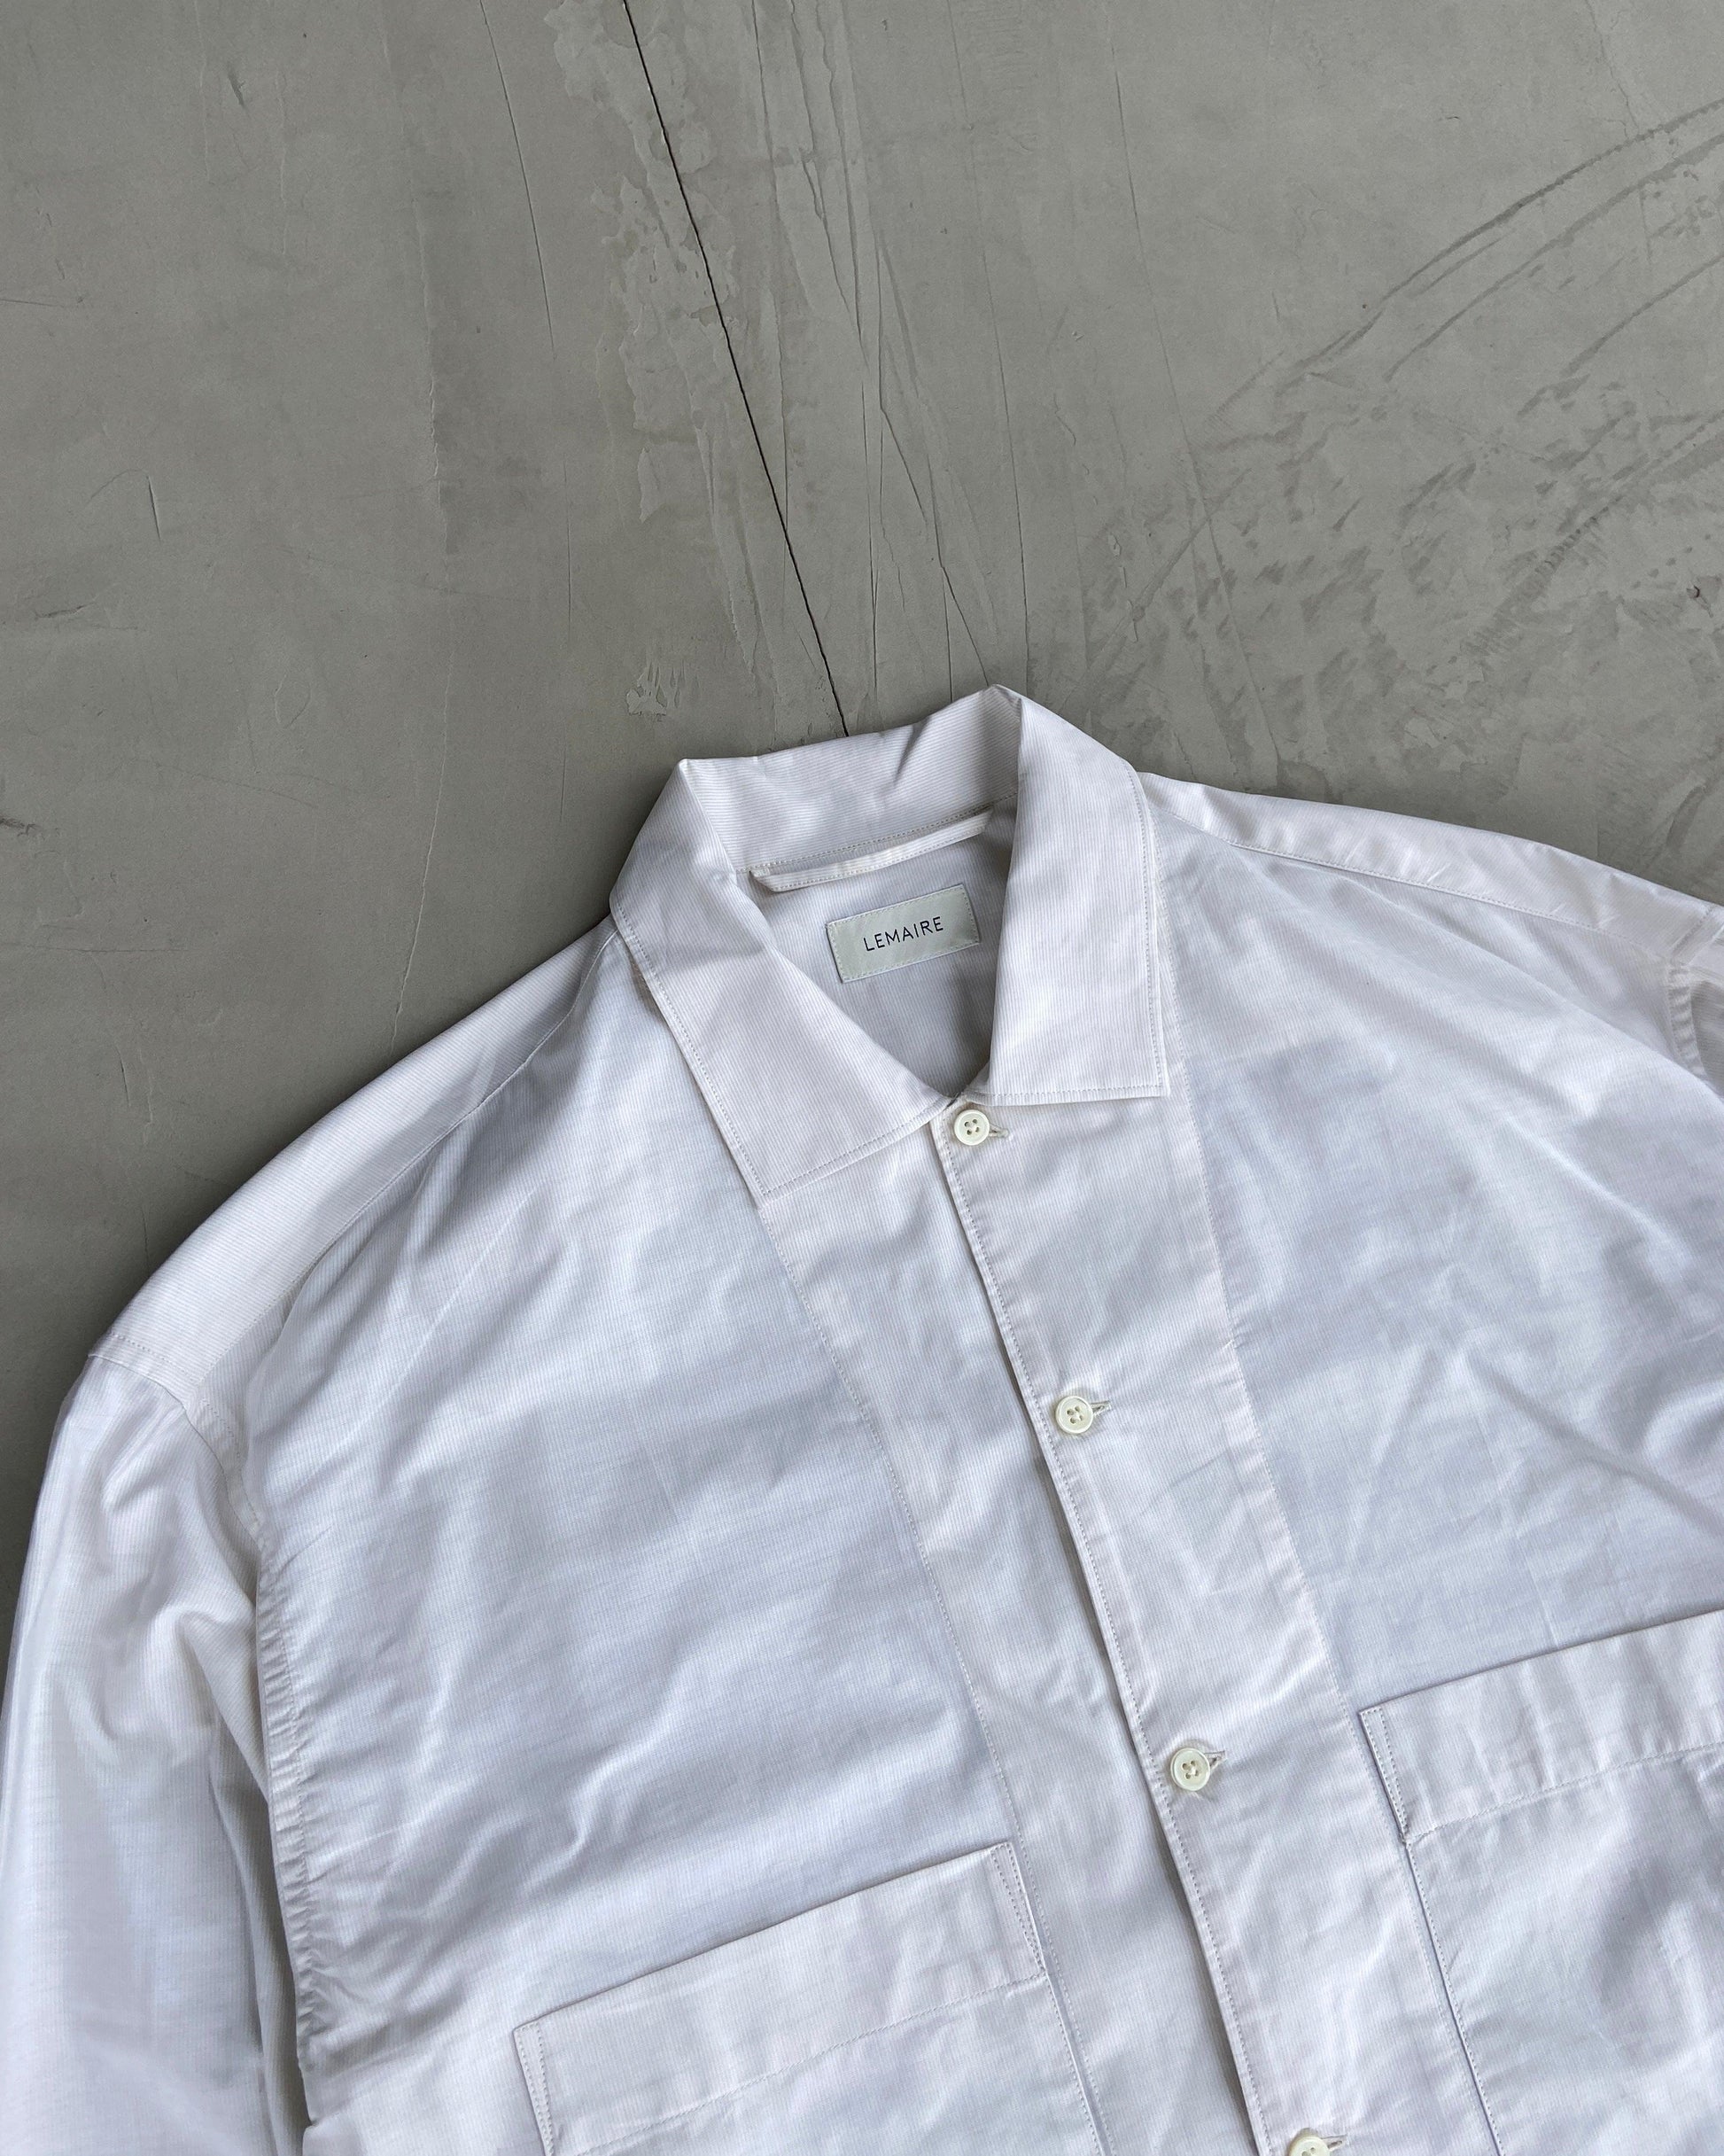 LEMAIRE PINSTRIPE WHITE SHIRT - M/L - Known Source